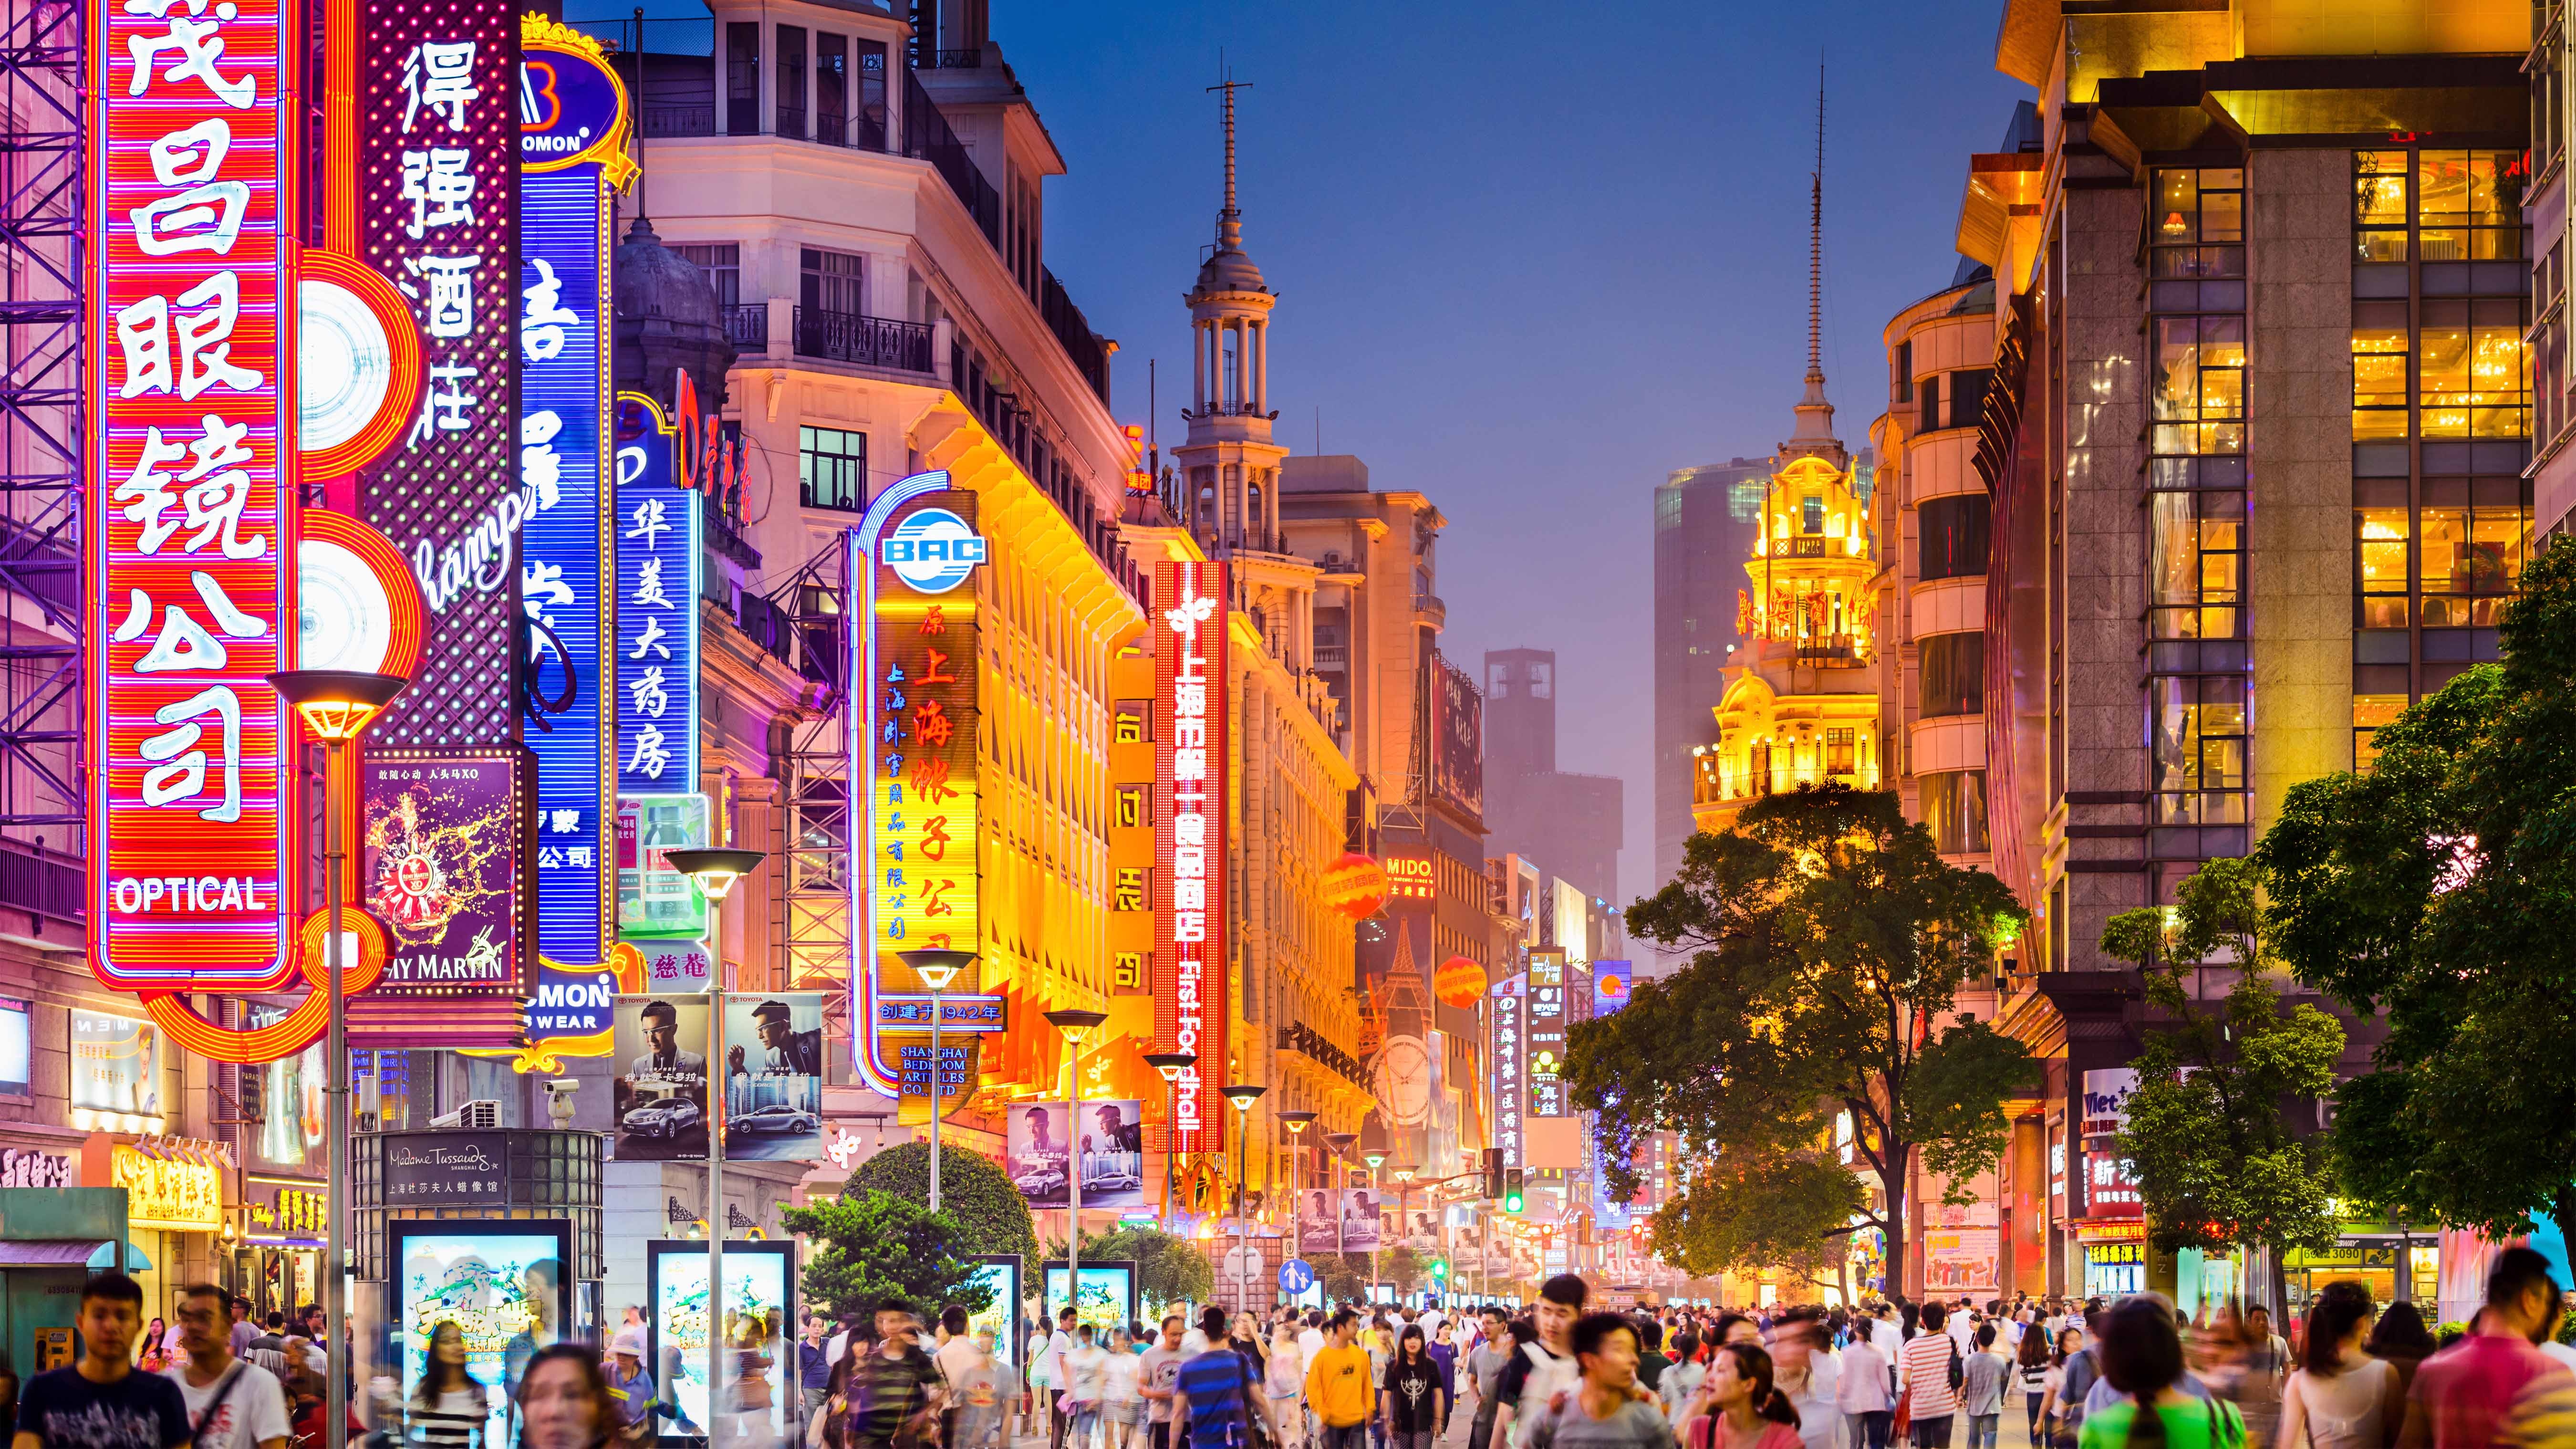 Shanghai recorded 358,300 foreign tourists in January this year. Photo: Shutterstock